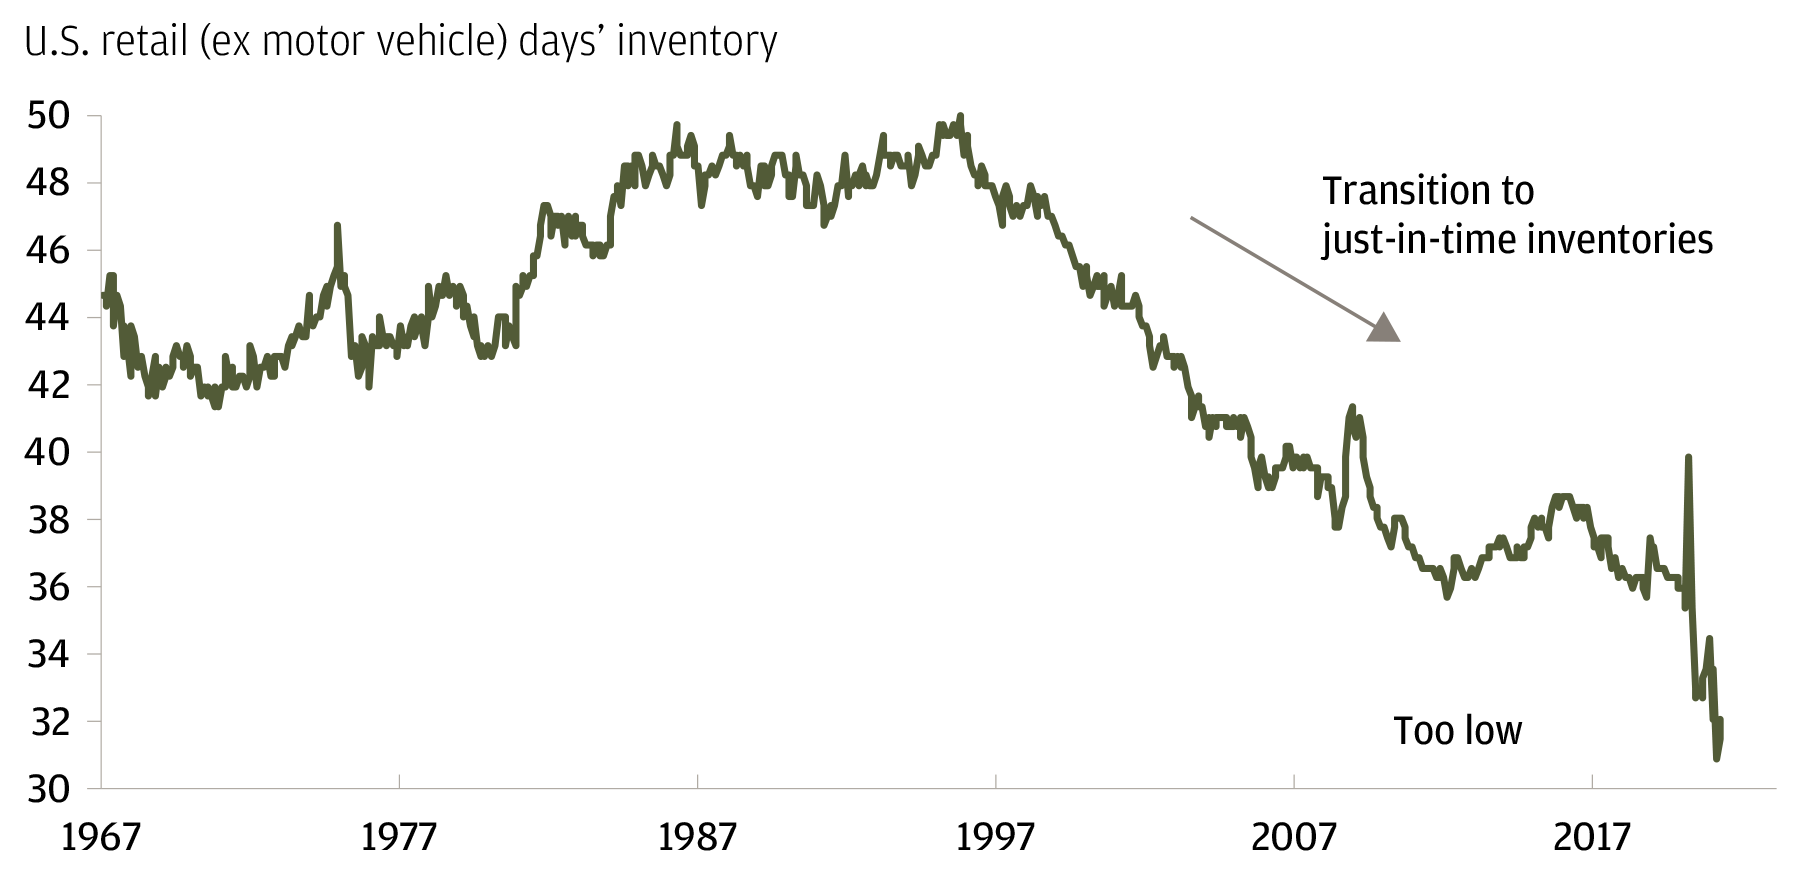 This chart shows days' inventories for retailers (excluding motor vehicle dealers). Inventories have come down substantially since the mid 1990s as firms moved to just-in-time inventories. The most recent plunge however, is driven by low inventories relative to sales in the COVID pandemic.